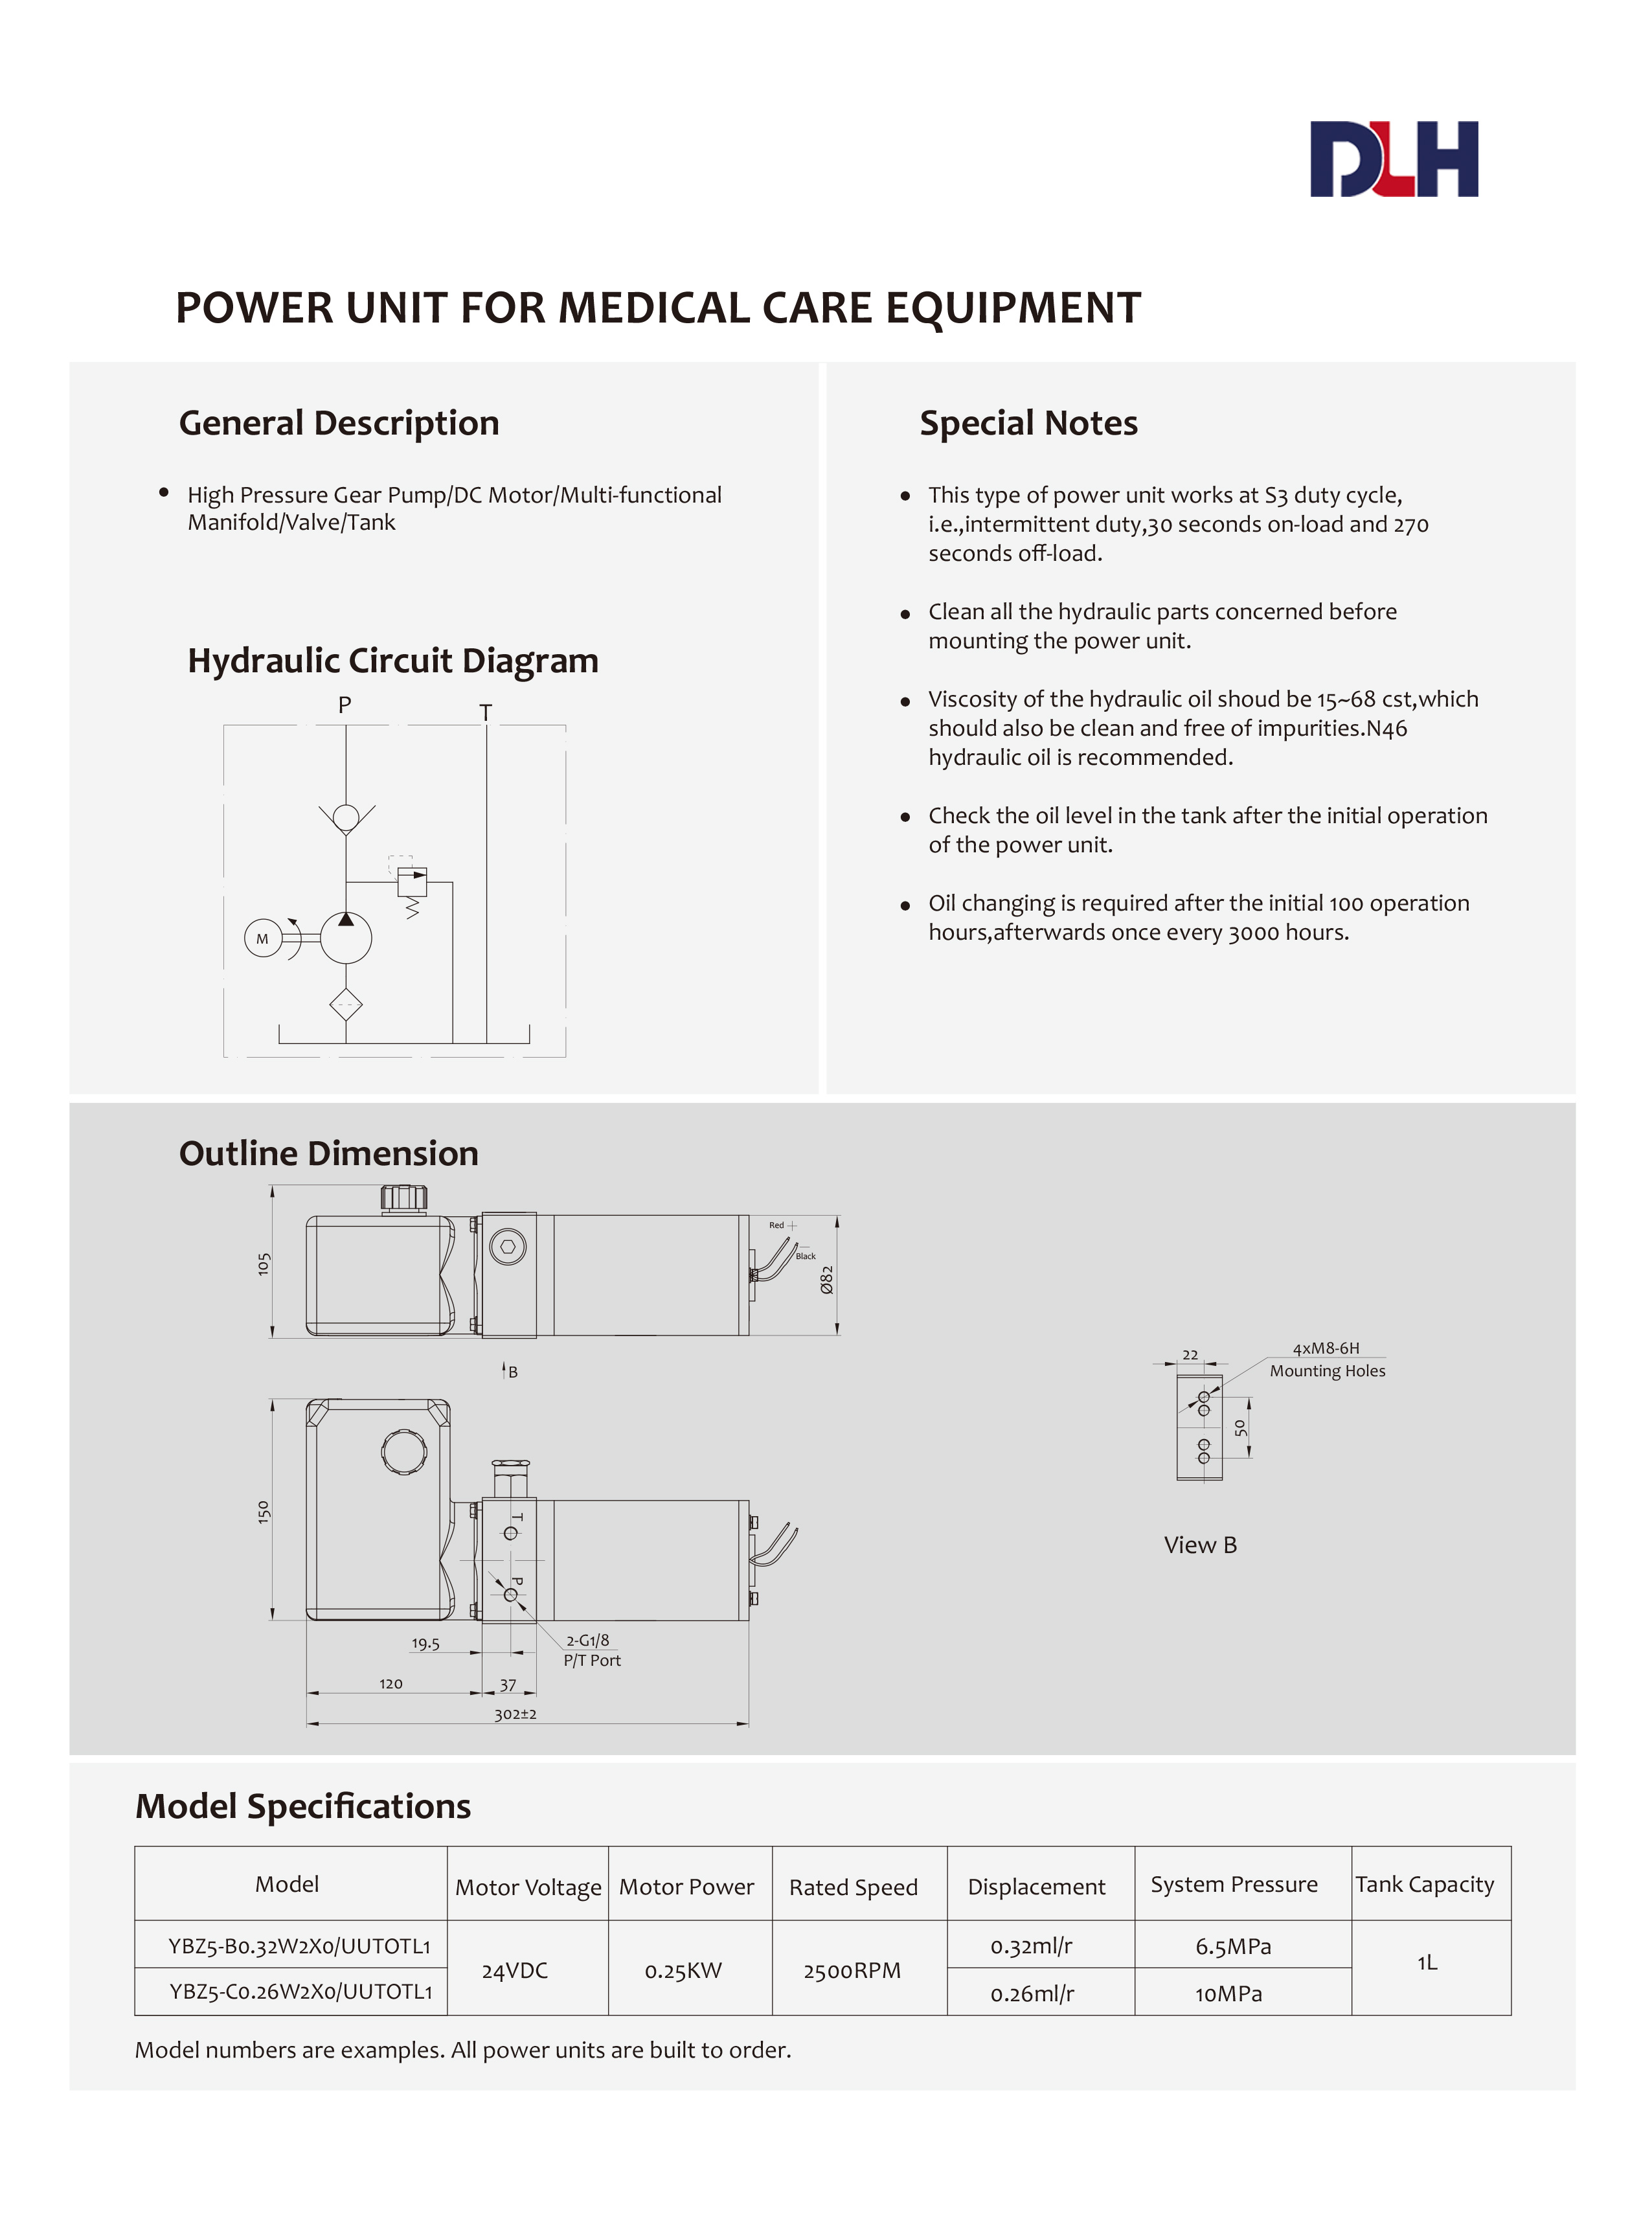 Power Unit for Medical Care Equipment